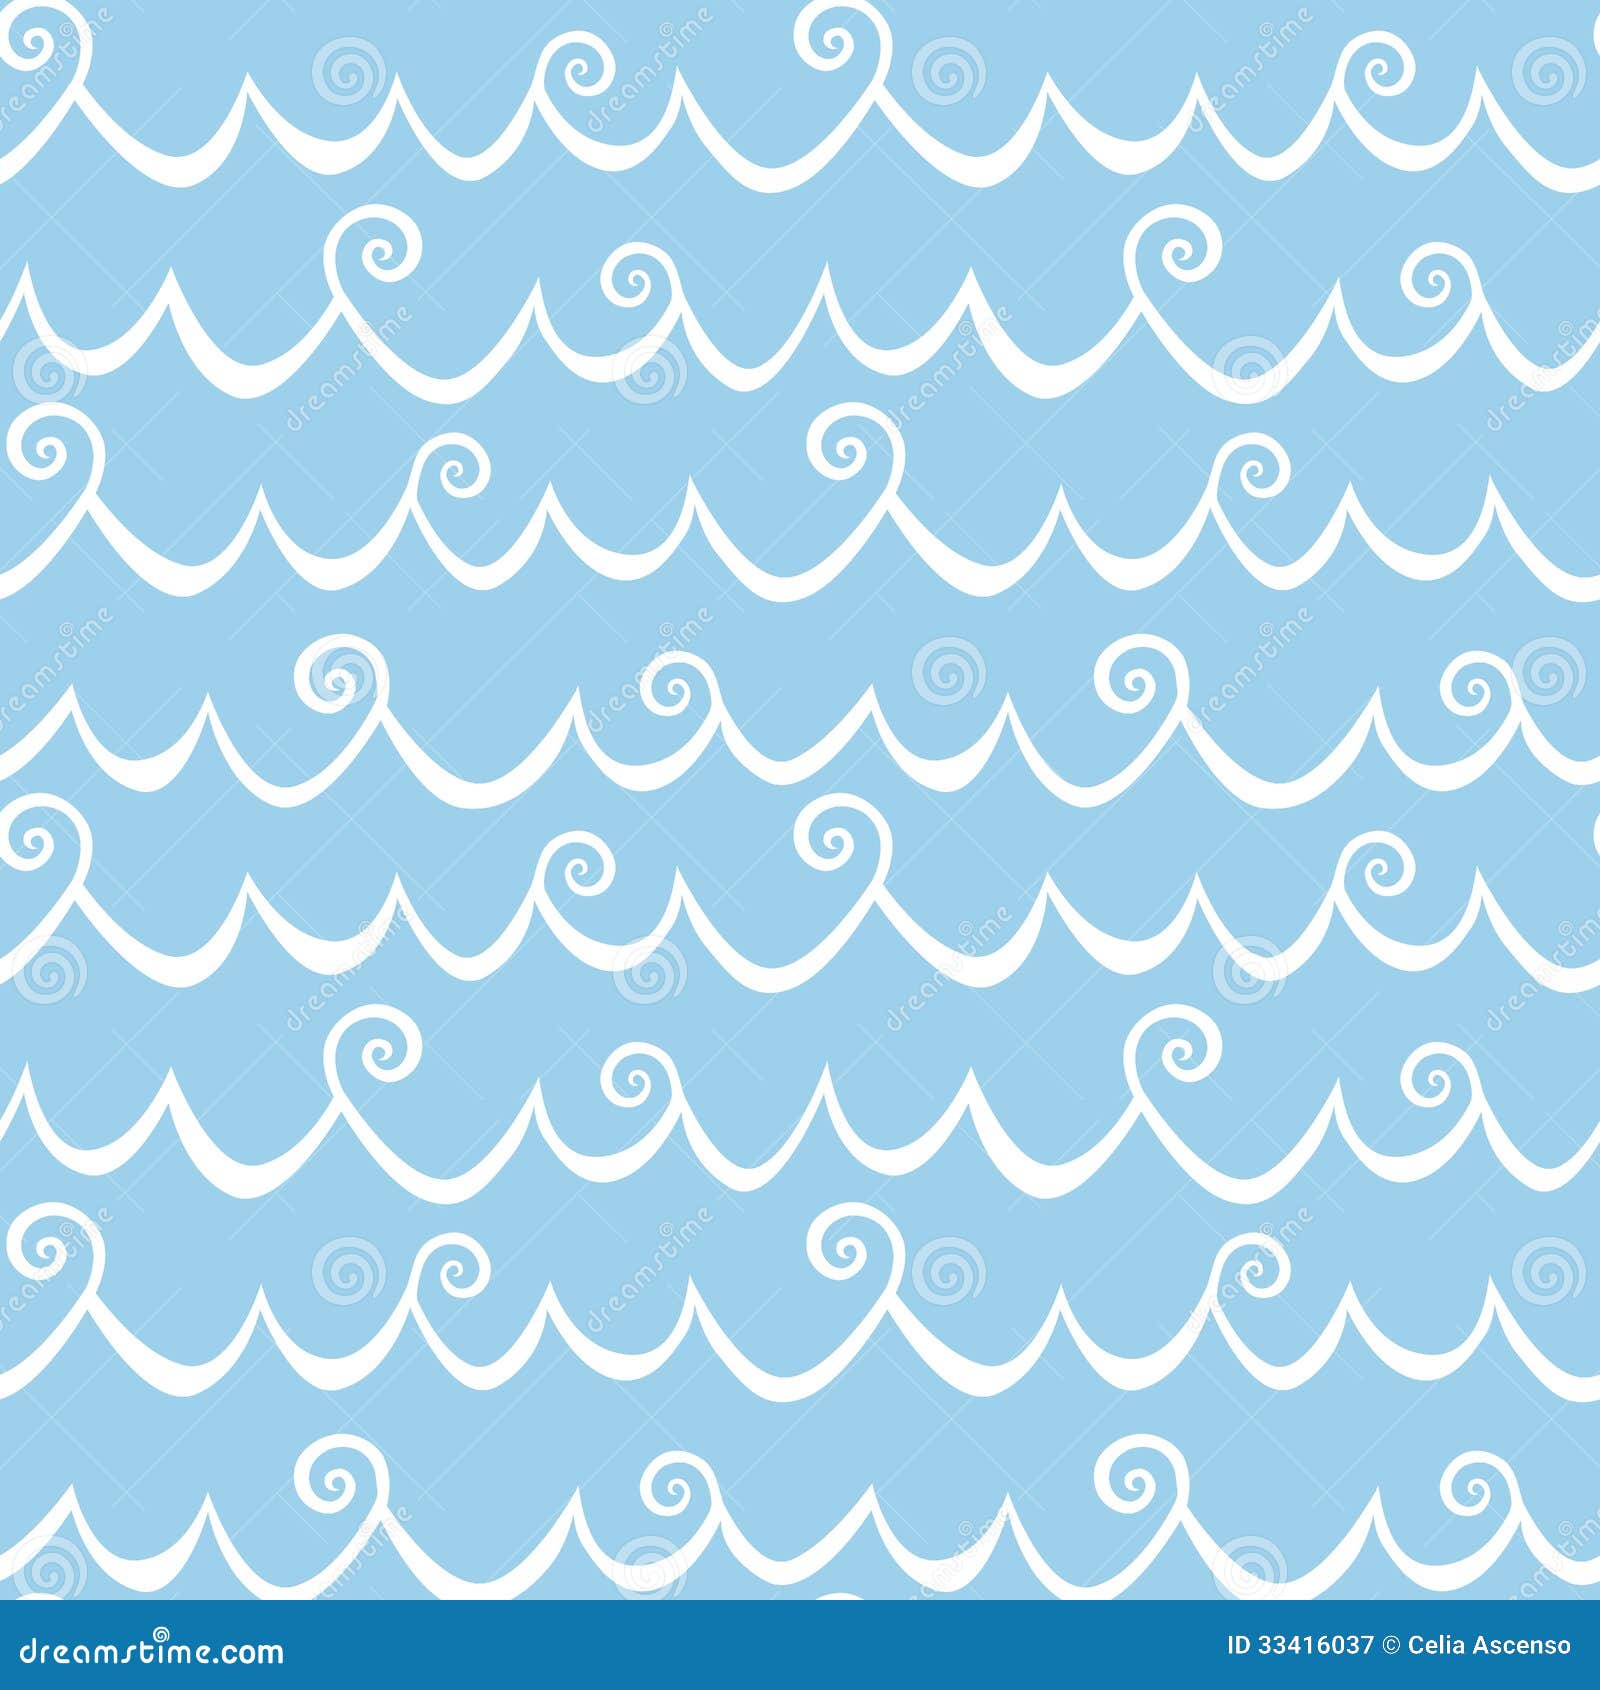 sea waves with curls seamless background